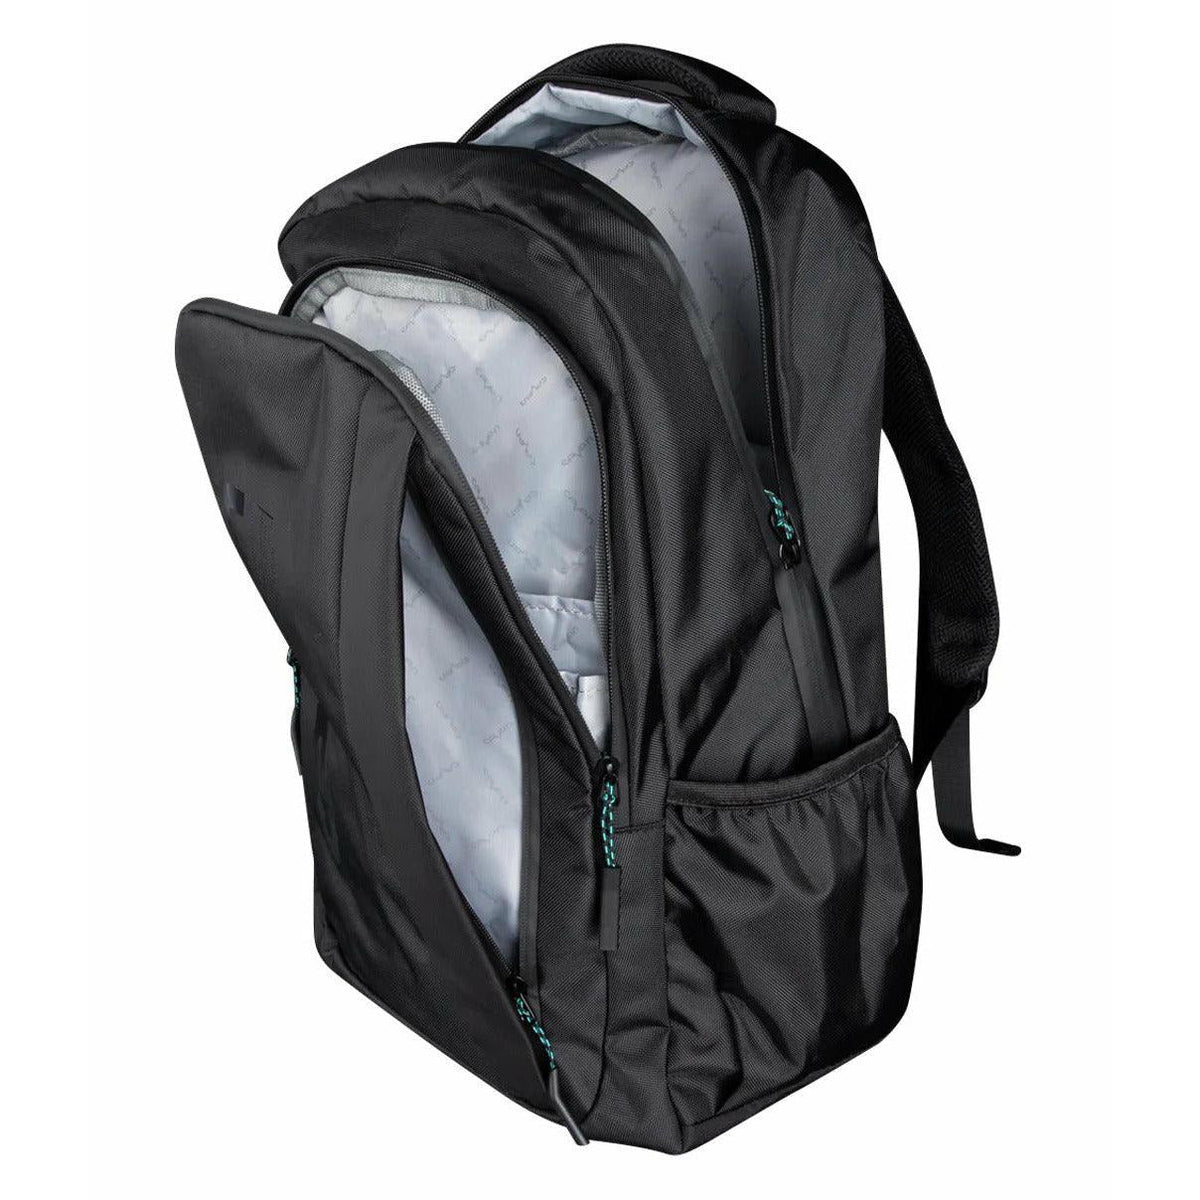 SEVEN-ACADEMY-BACKPACK - BACKPACK - Synik Clothing - synikclothing.com